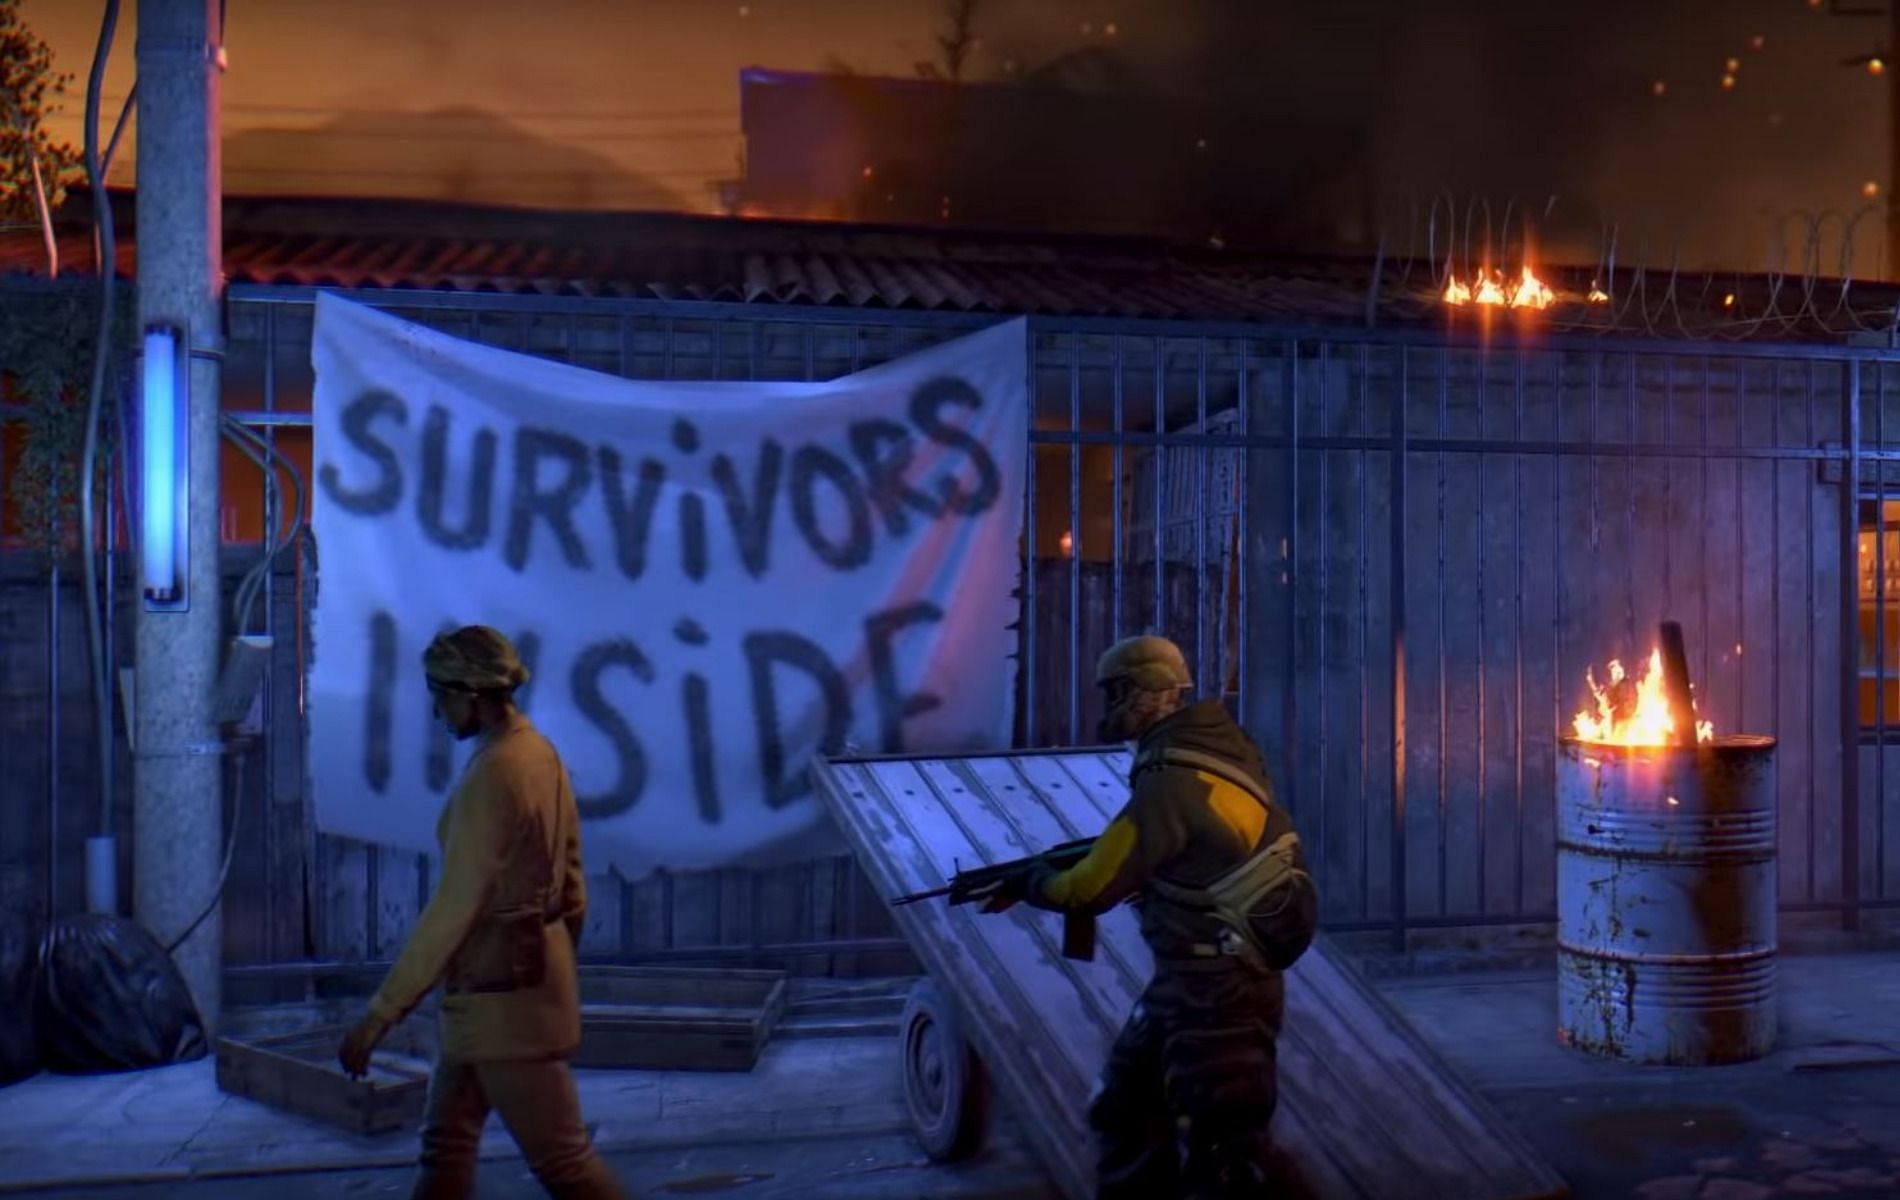 Lead the survivors to safety in this event. (Image captured from the trailer by Techland)